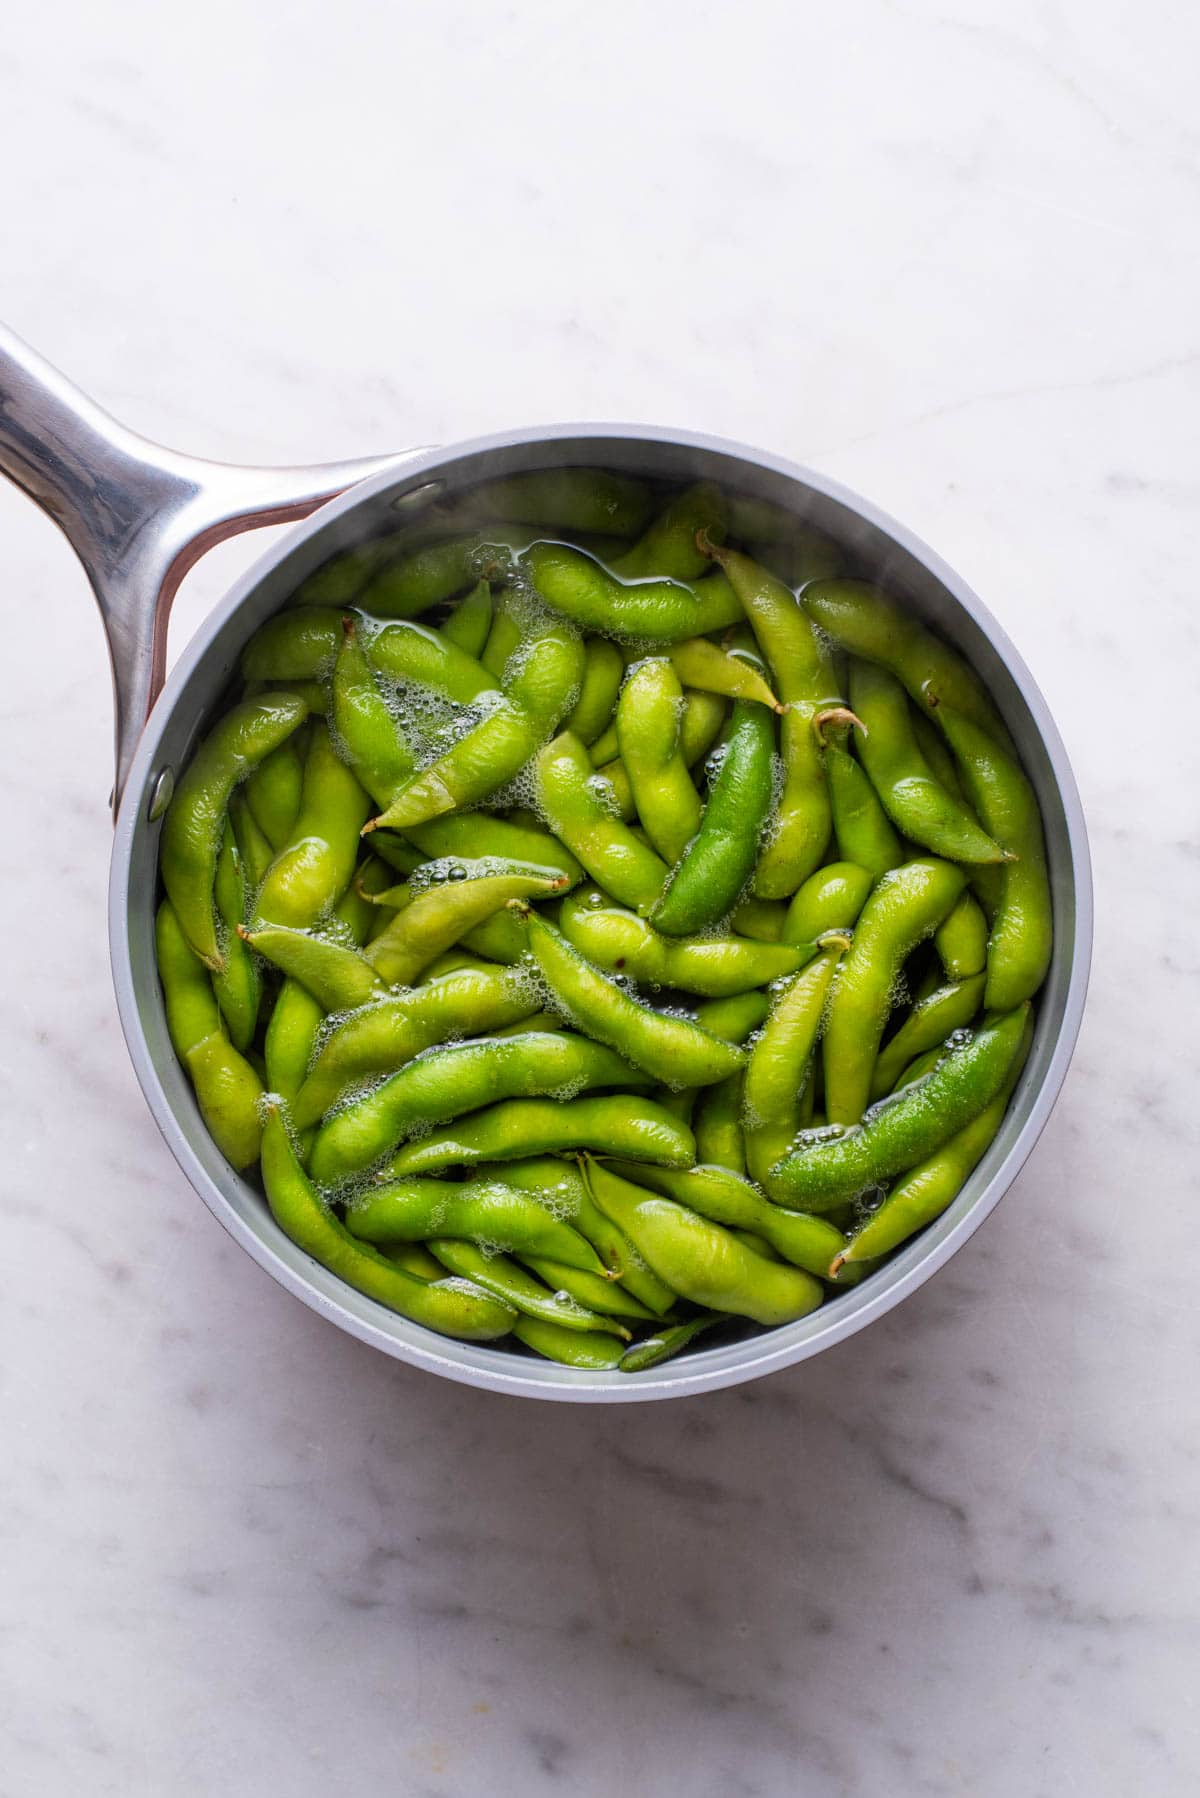 Boiling edamame pods in a pot of water.